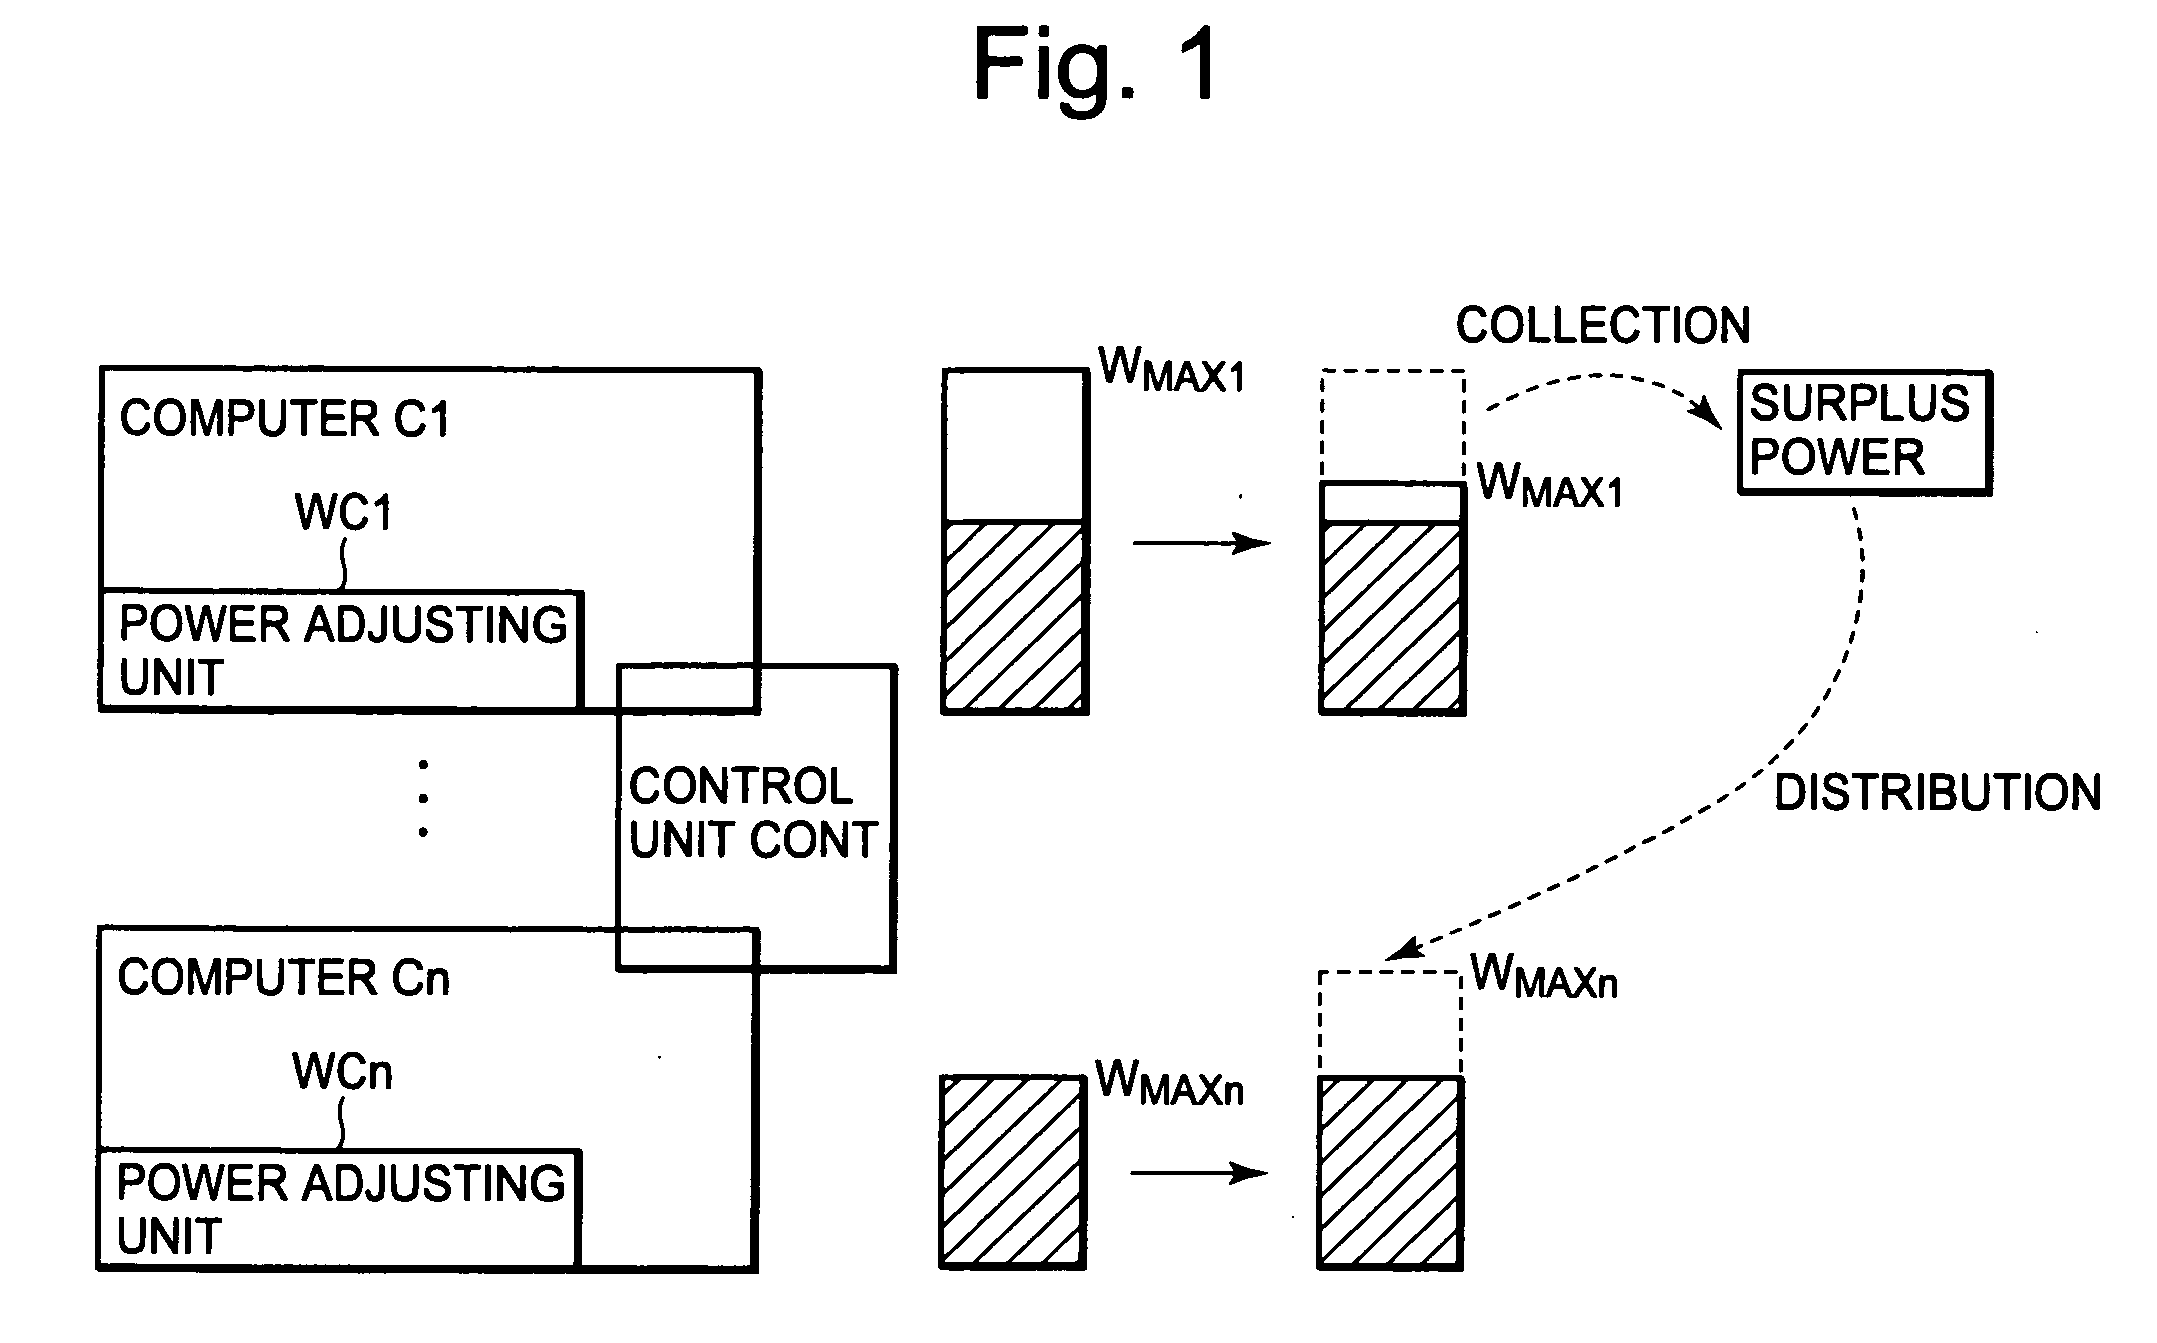 Apparatus, system and method for power management